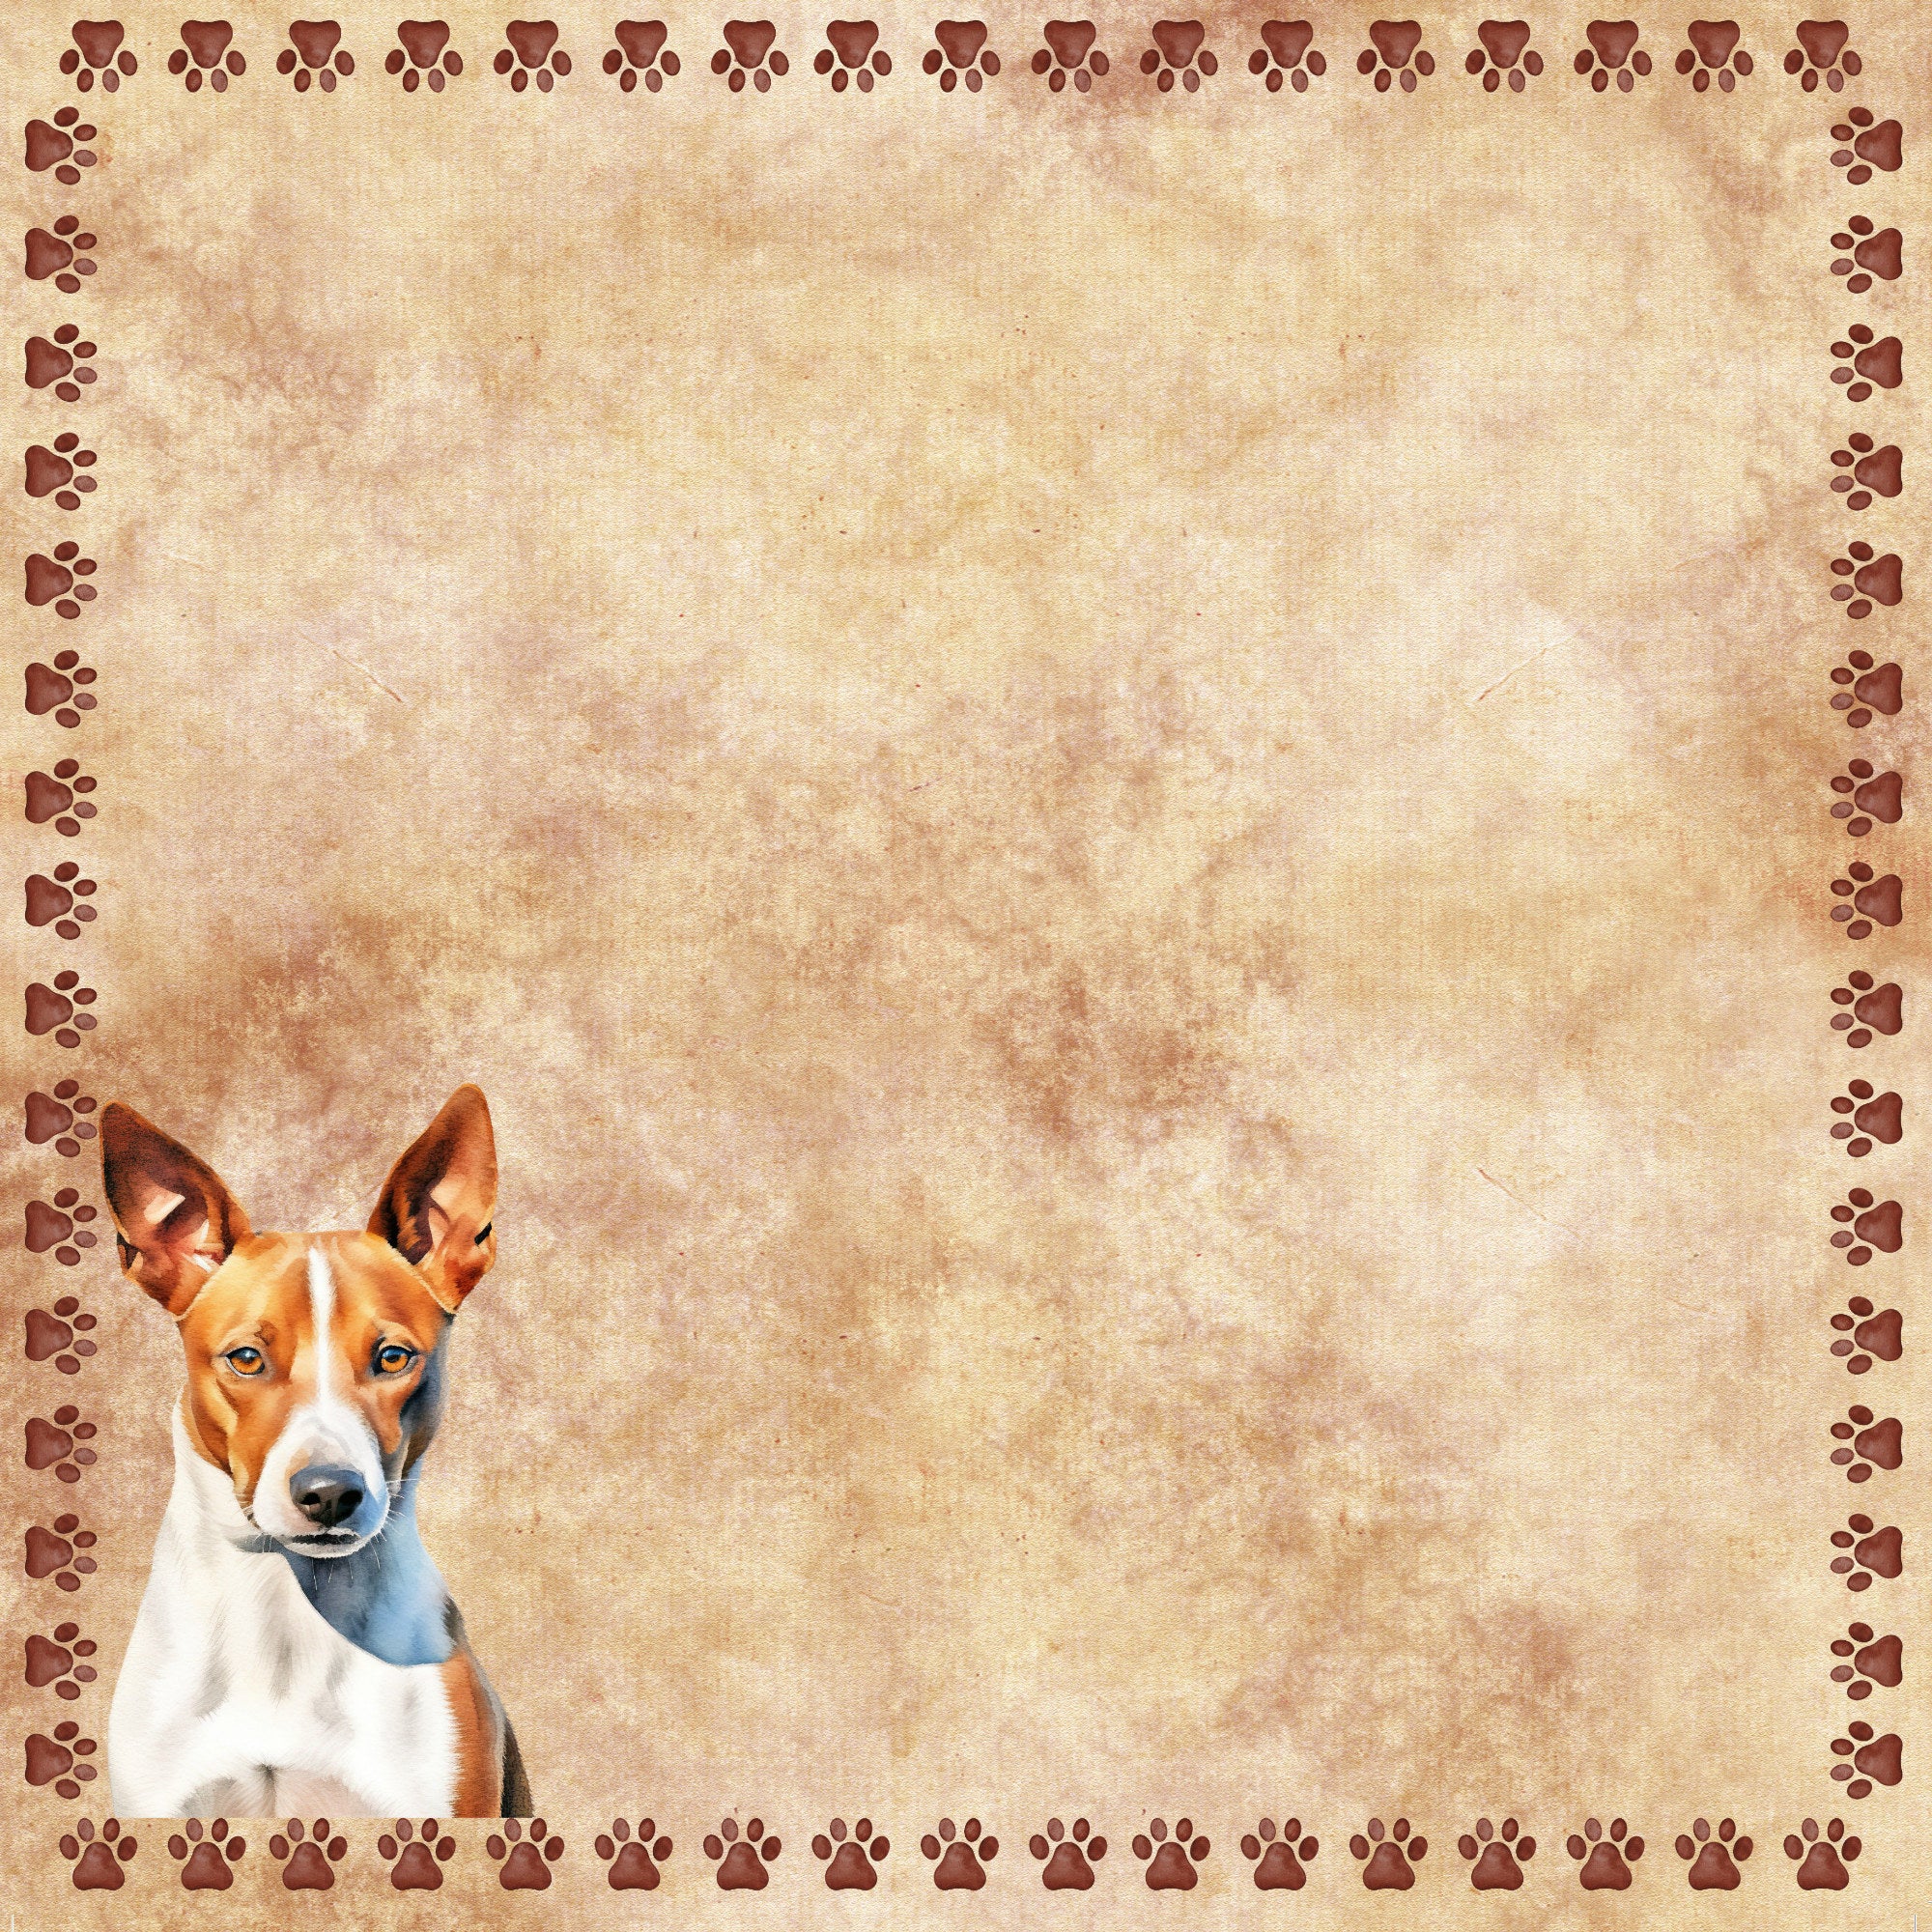 Dog Breeds Collection Basenji 12 x 12 Double-Sided Scrapbook Paper by SSC Designs